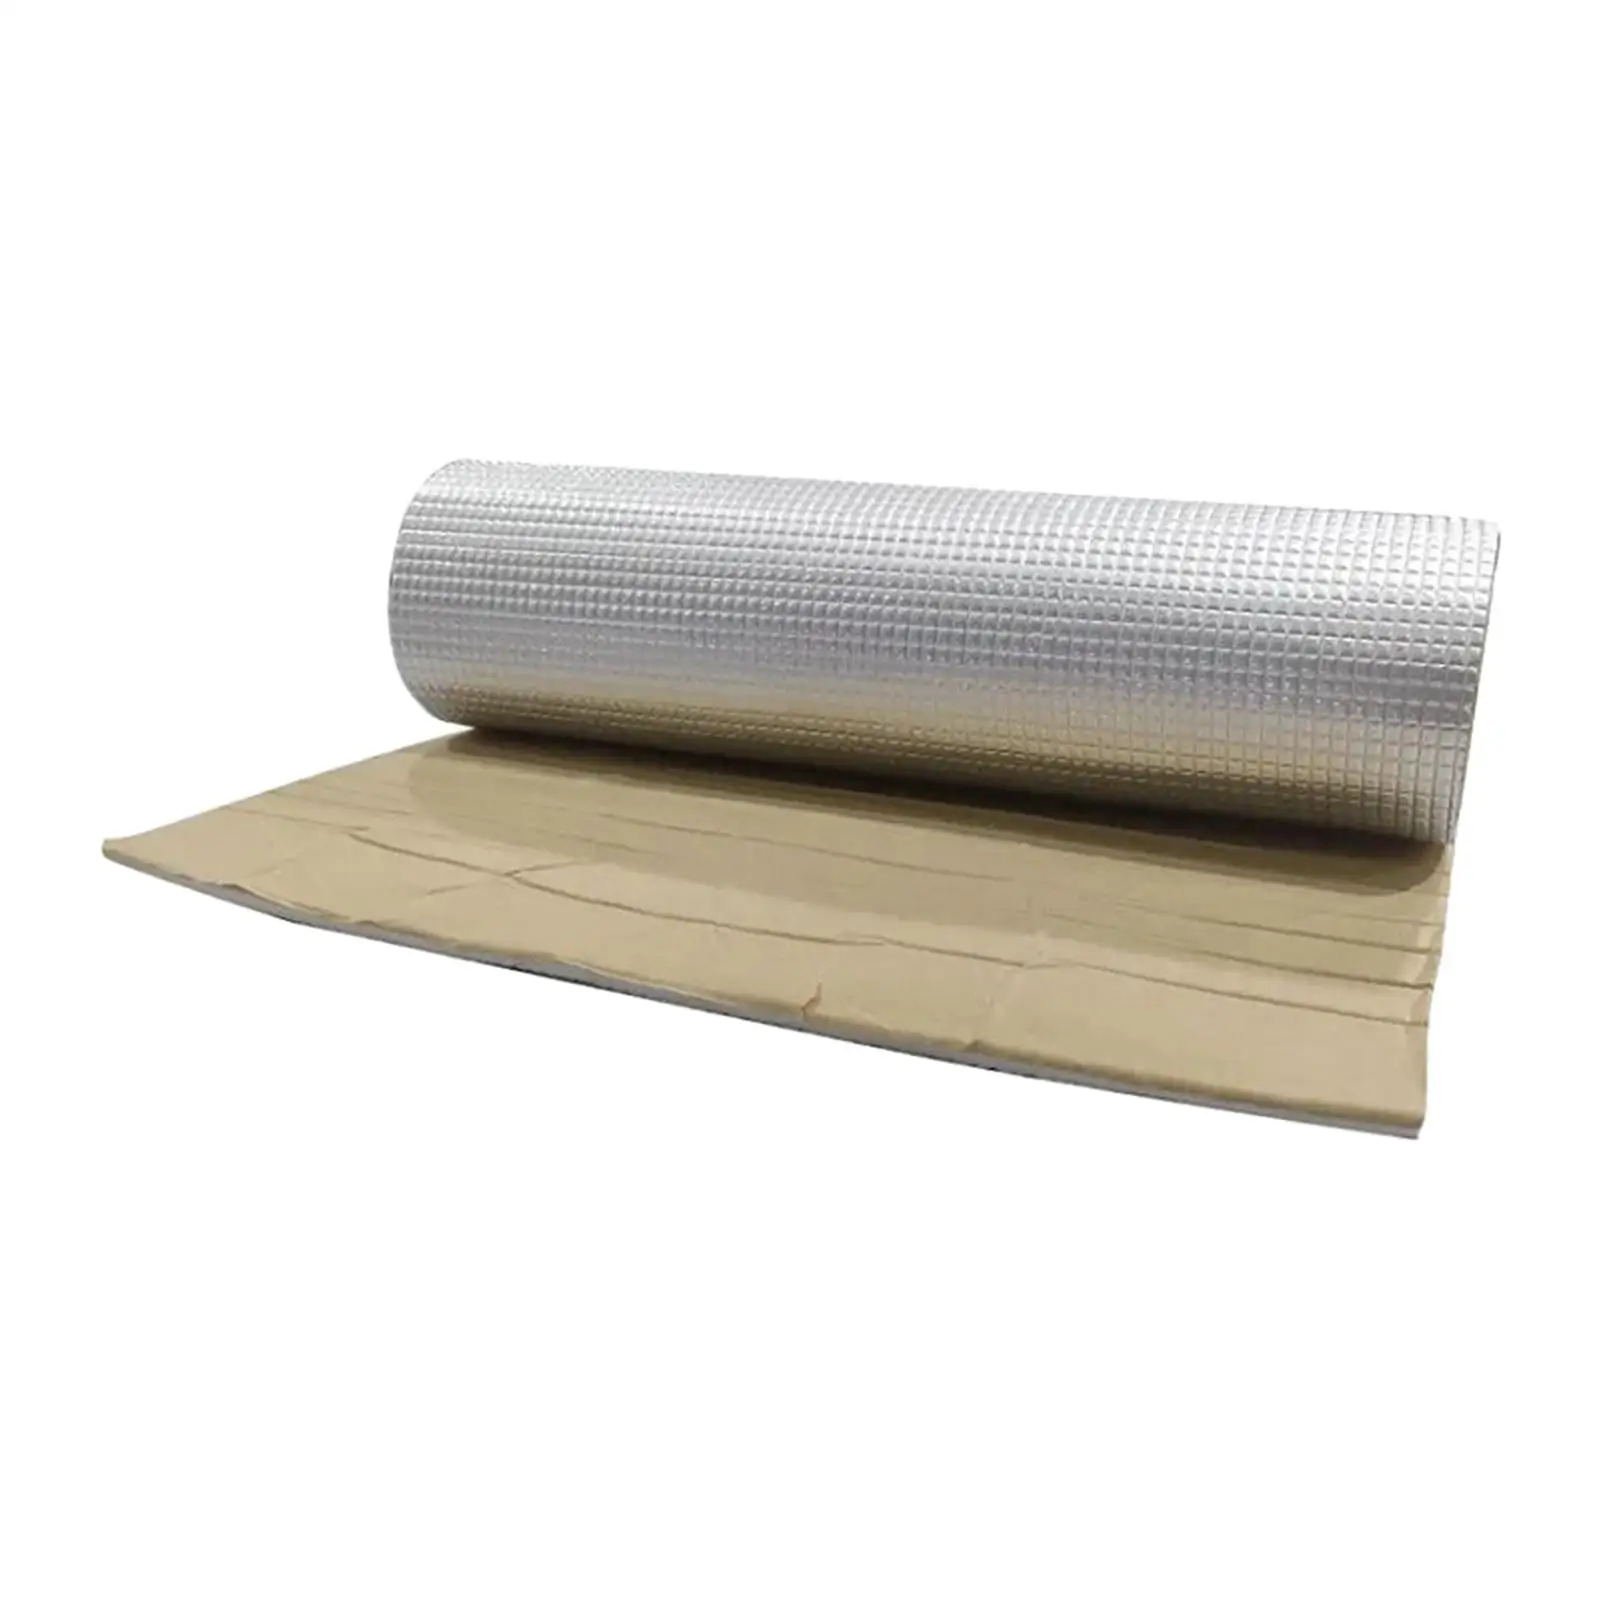 Sound Deadener Insulation Mat Auto Accessory Assembly Thermal Insulation Properties Direct Replaces Car Noise Sound Deadener